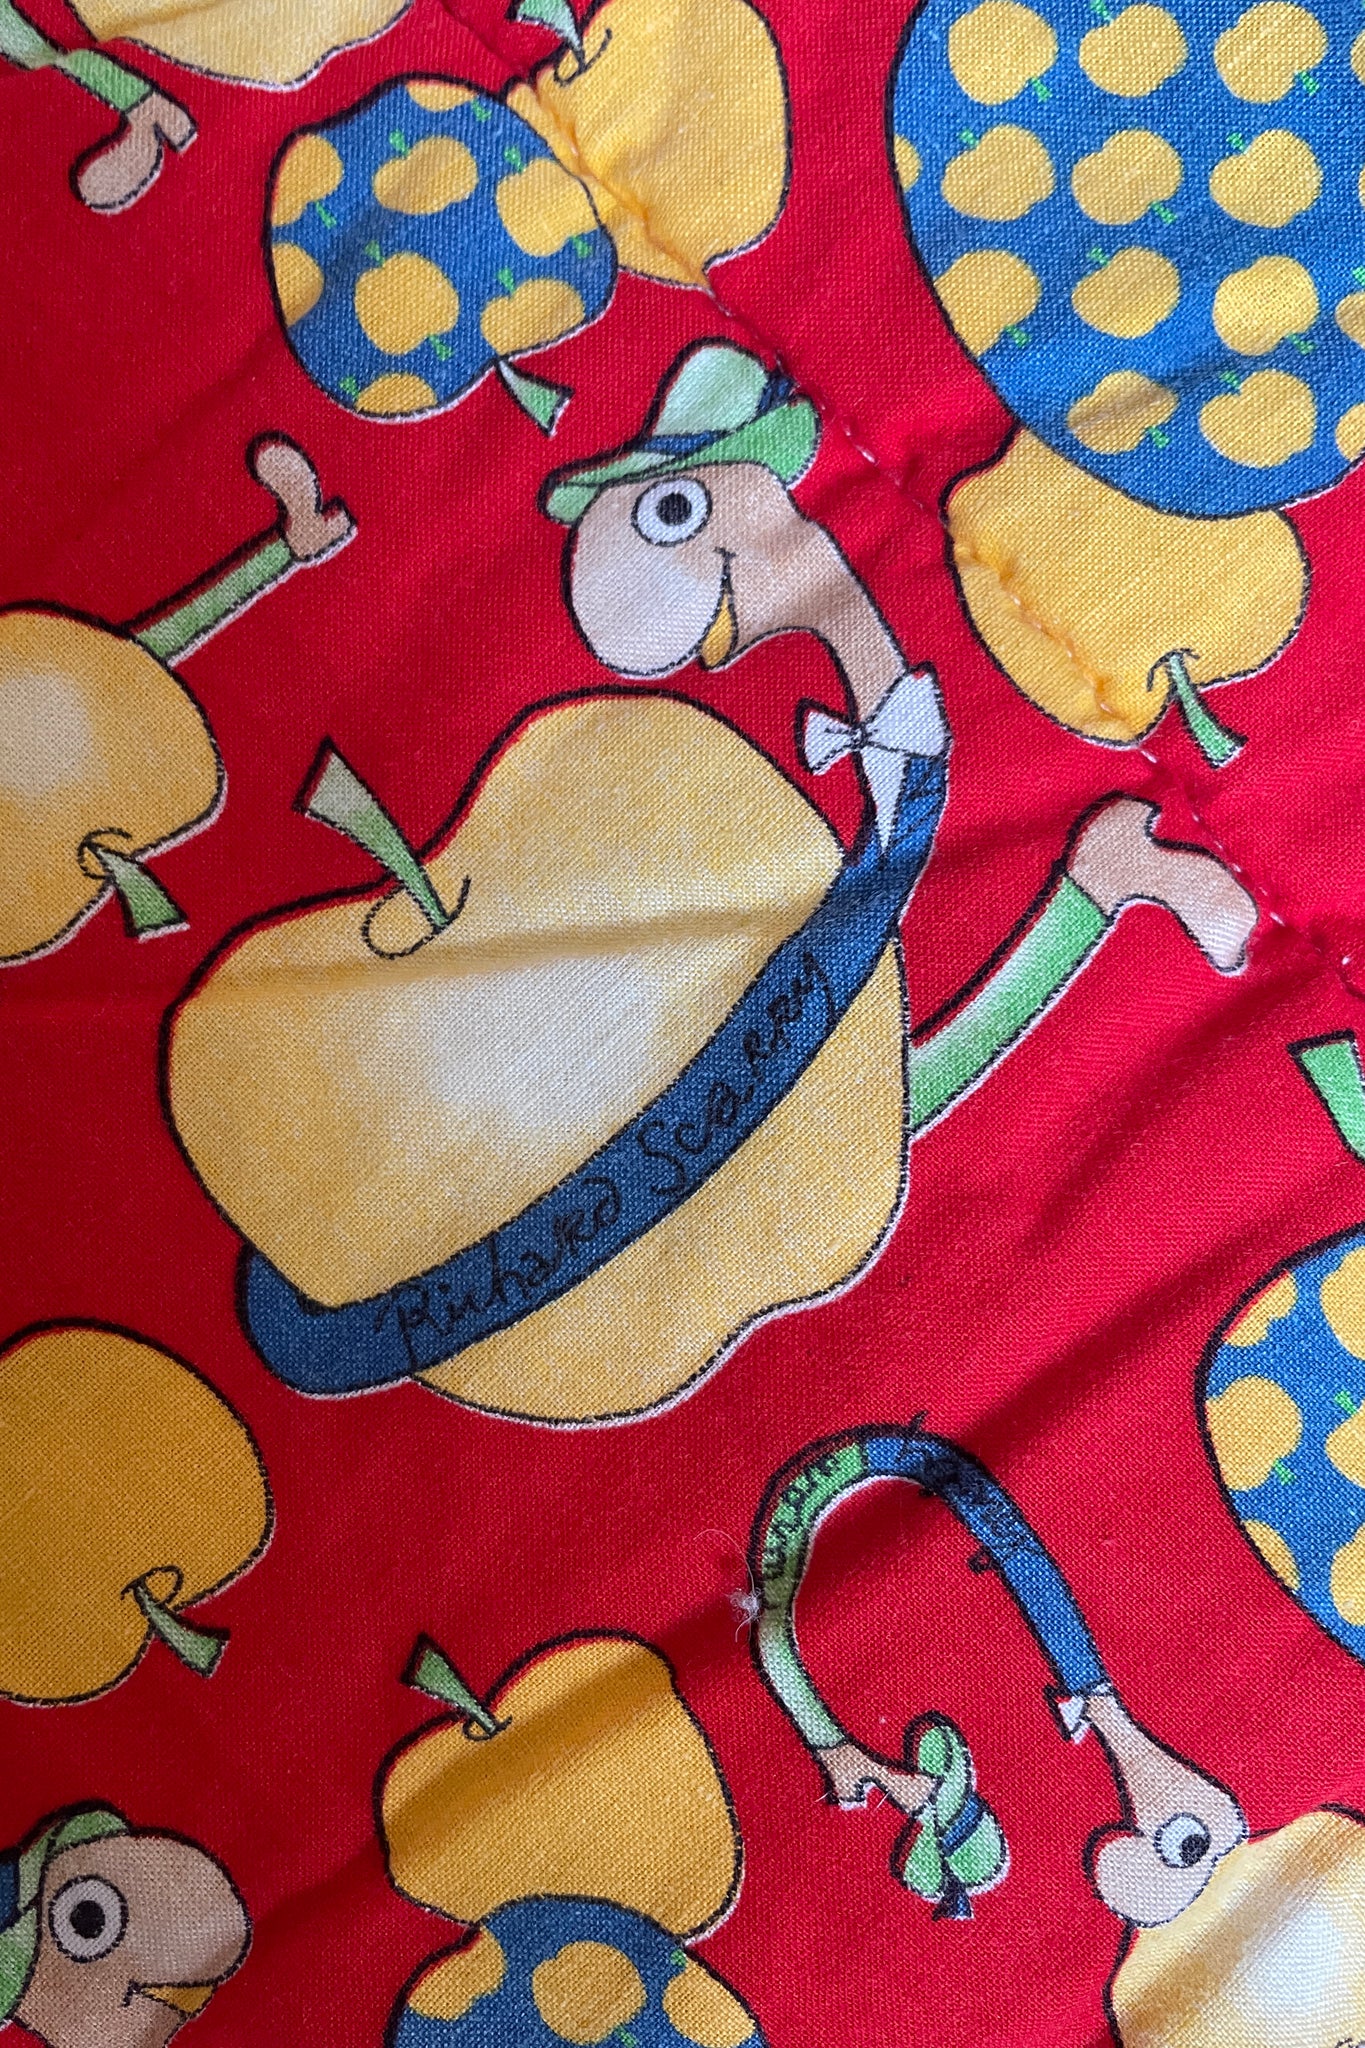 Made To Order - Vintage "Richard Scarry Lowly Worm" Sleeping Bag Bomber Jacket, size XS - XXL